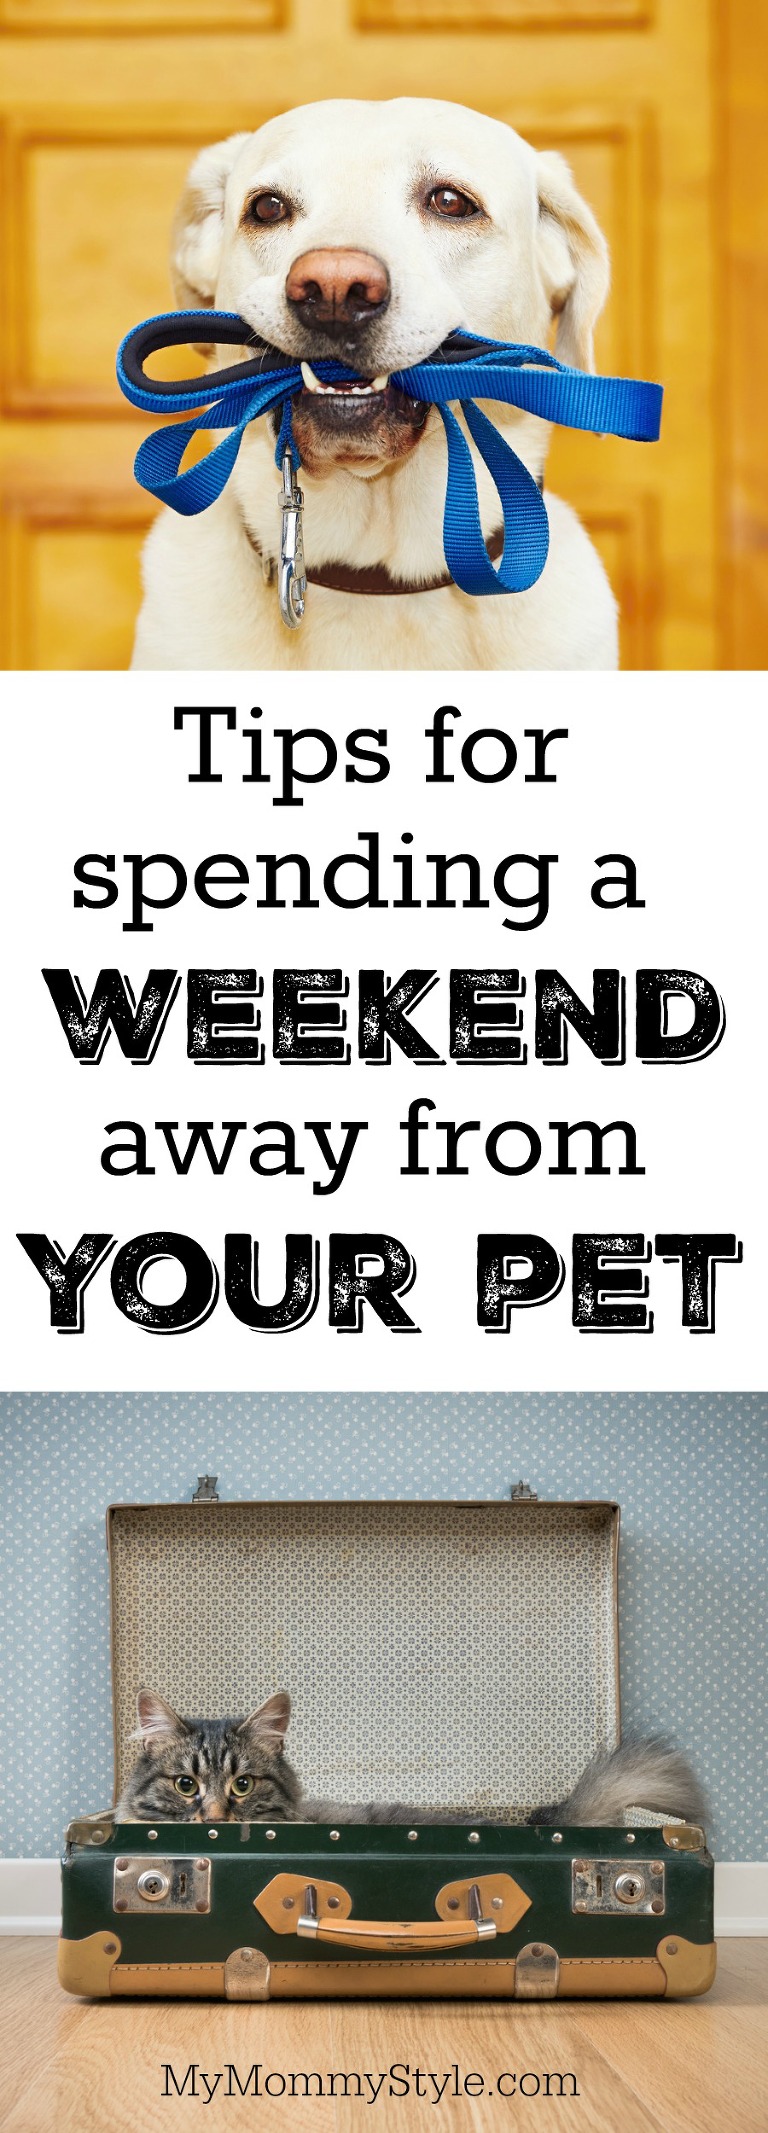 Tips for spending a weekend away from your pet